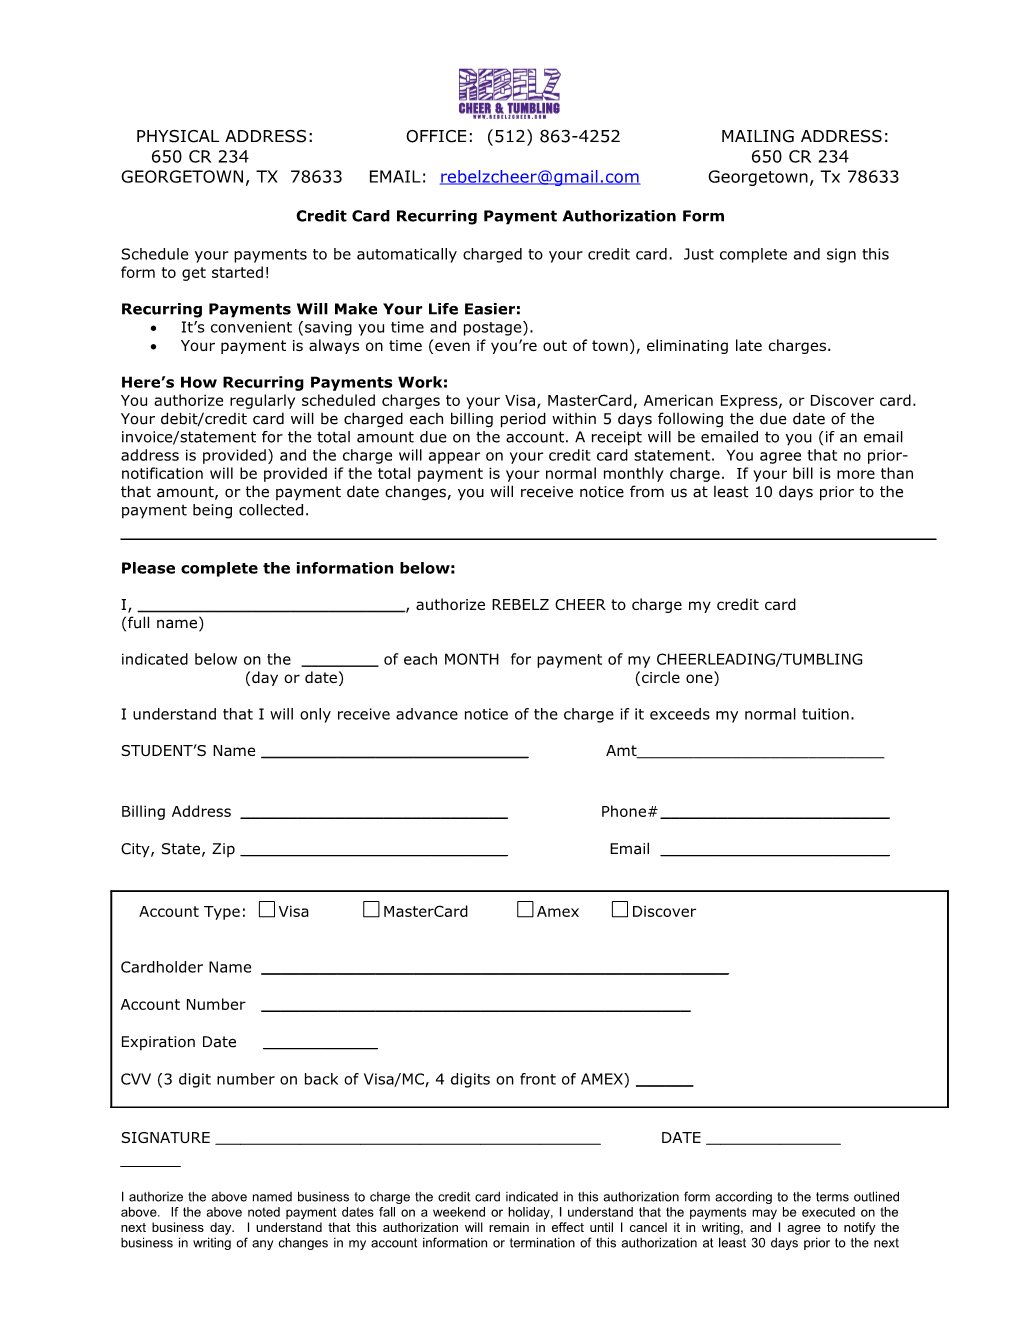 Credit Card Recurring Payment Authorization Form Variable Amount s1